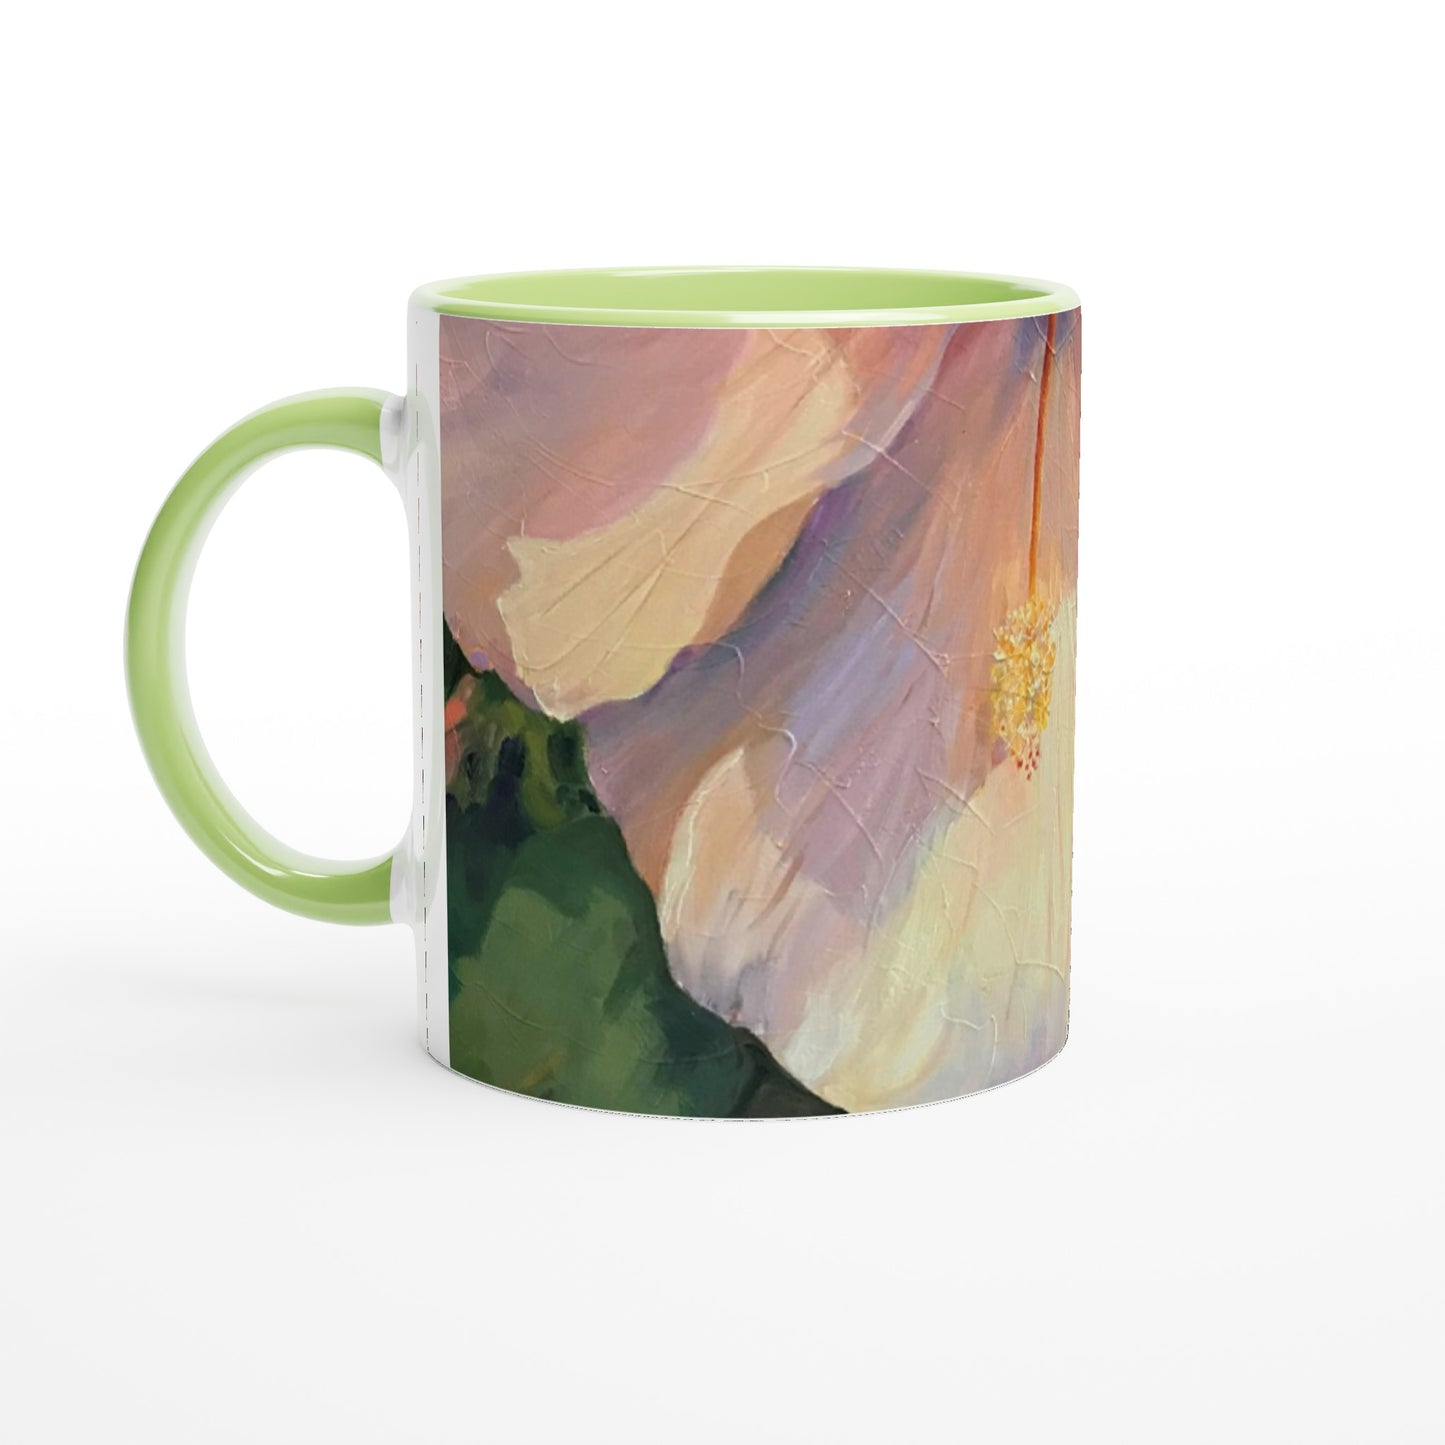 "Hibiscus" White 11oz Ceramic Mug with Color Inside by Barbara Cleary Designs